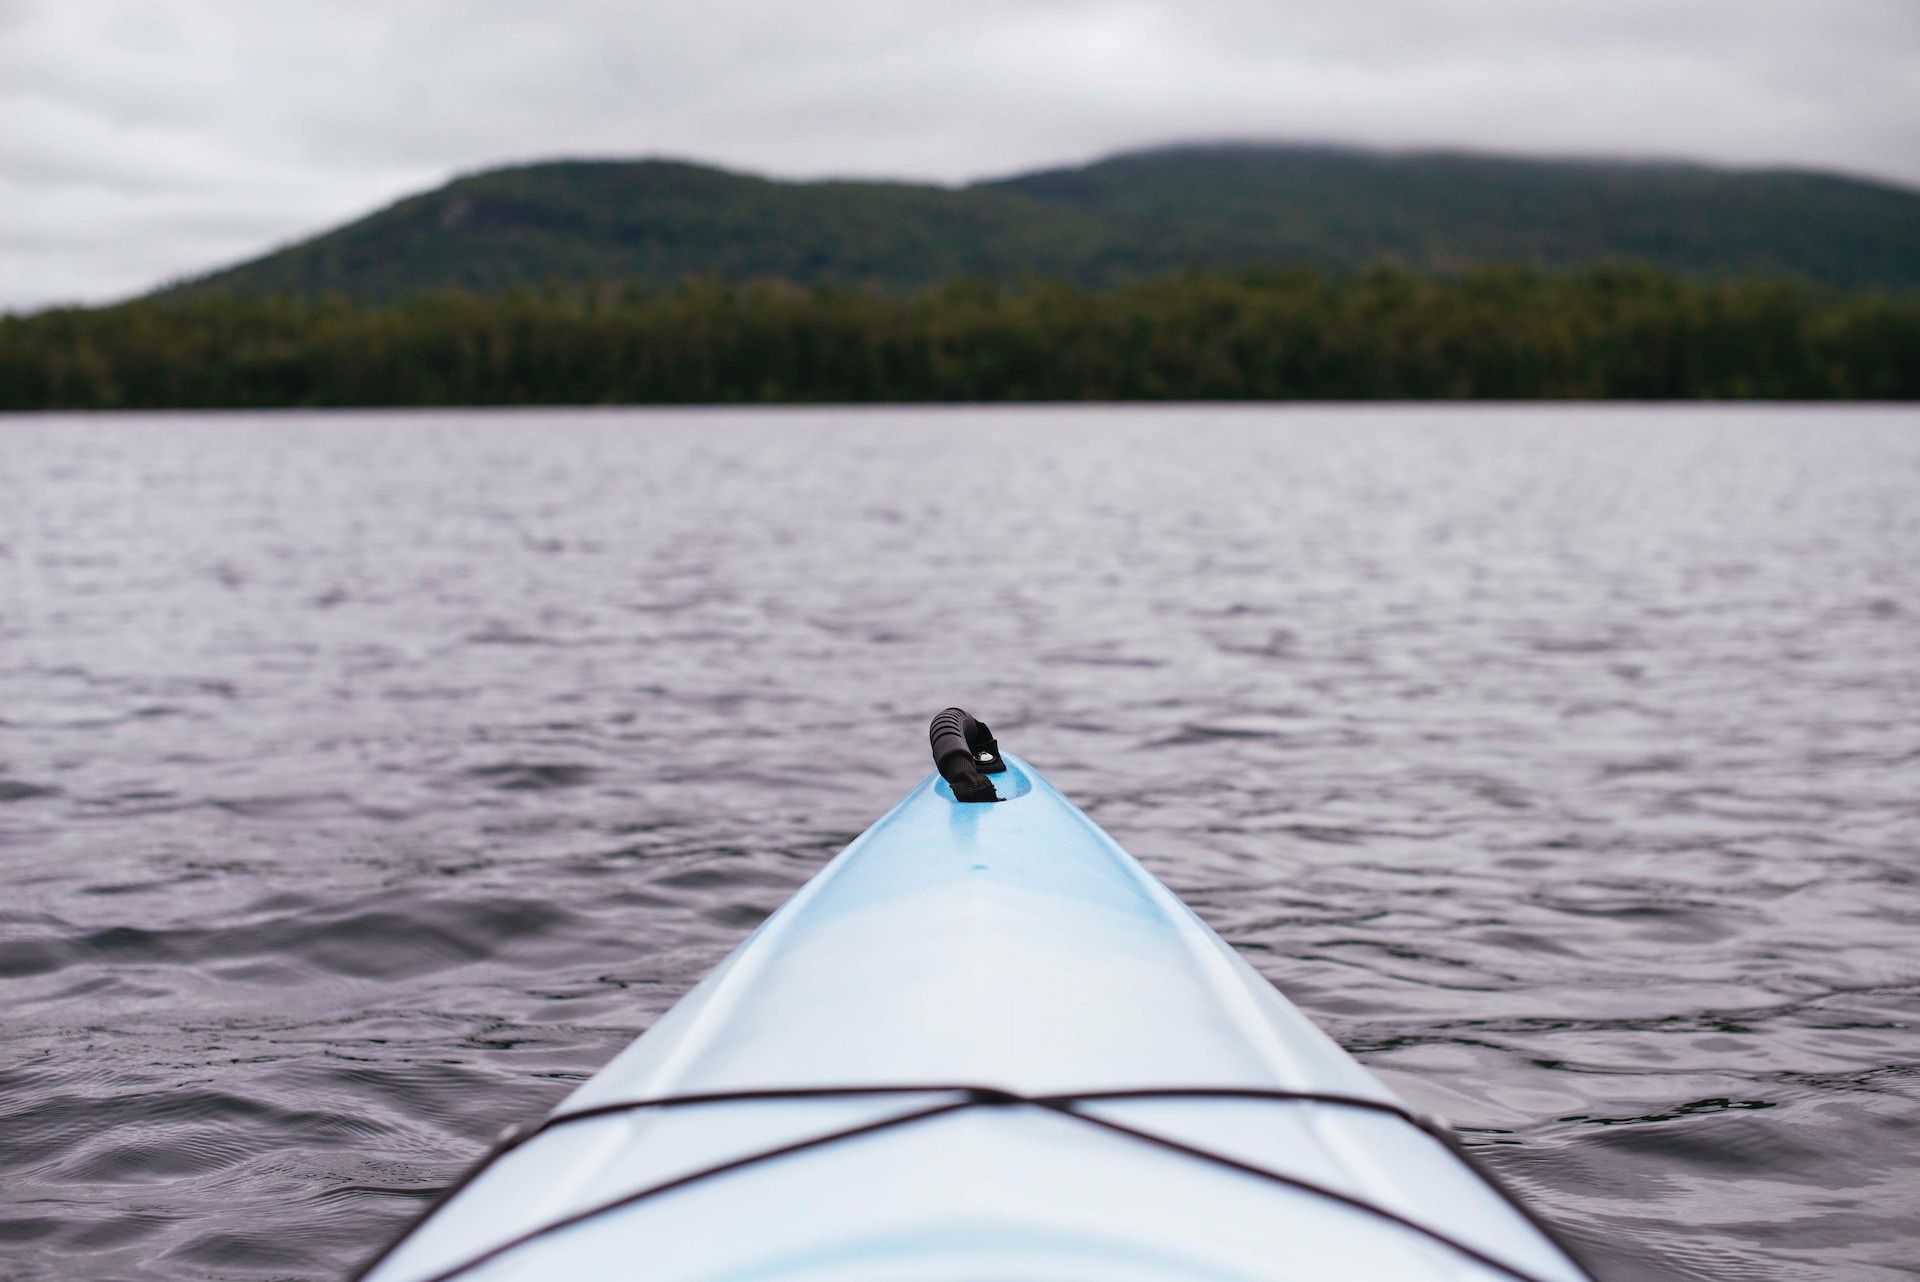 Kayak in a lake with a forest and a mountain in a blurred background